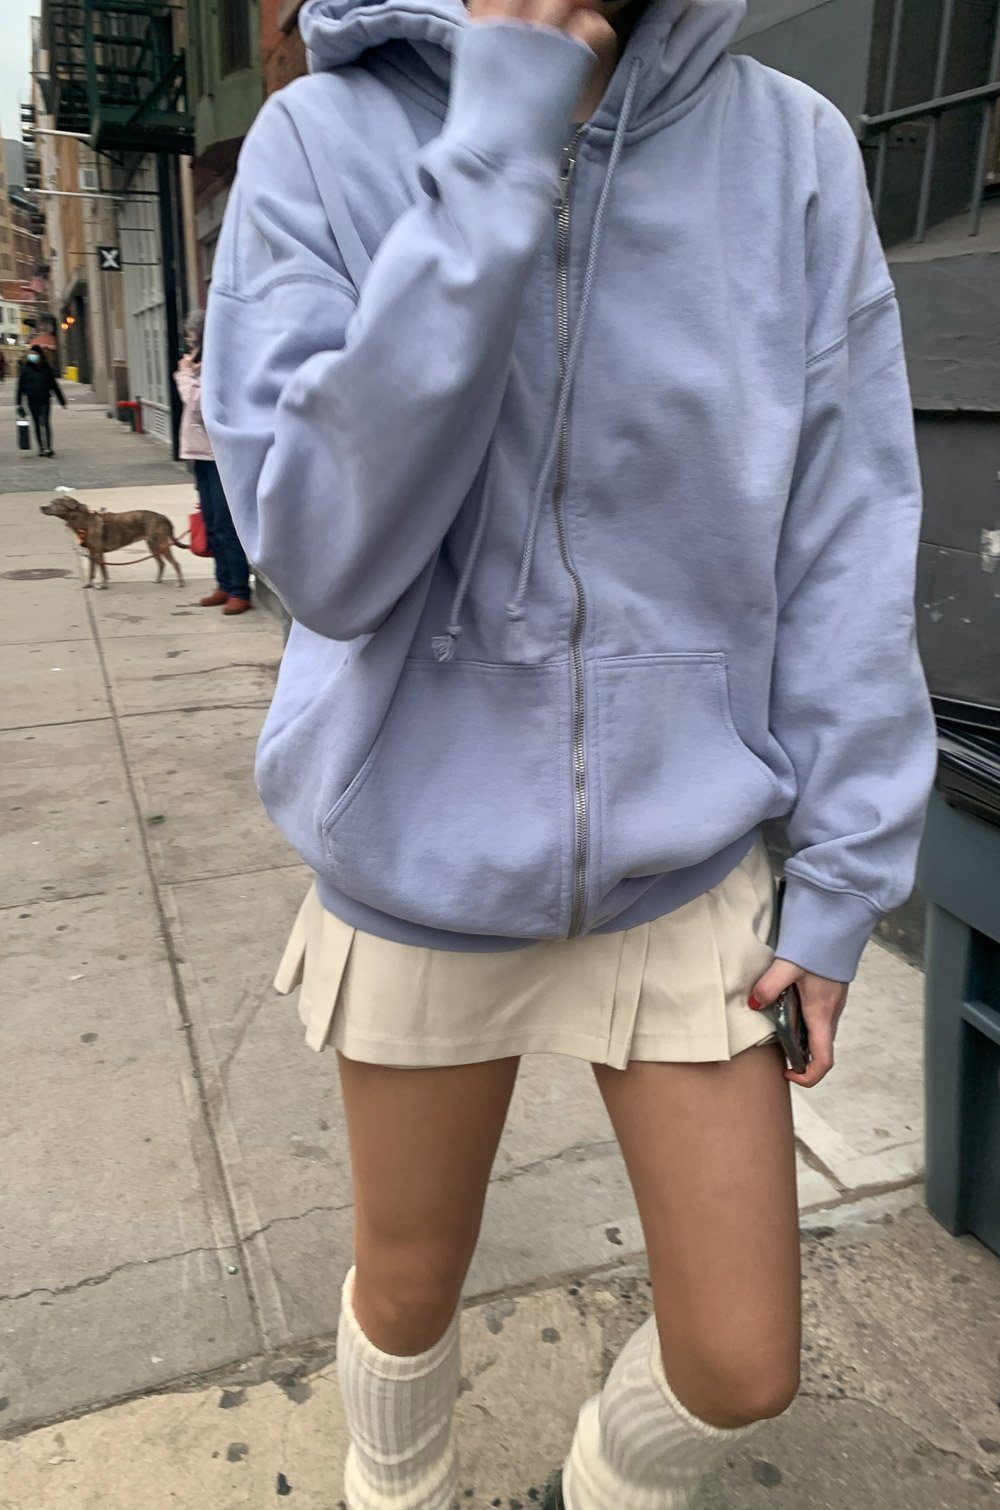 Brandy Melville Brandy Christy Hoodie Blue - $57 New With Tags - From  Lindsey